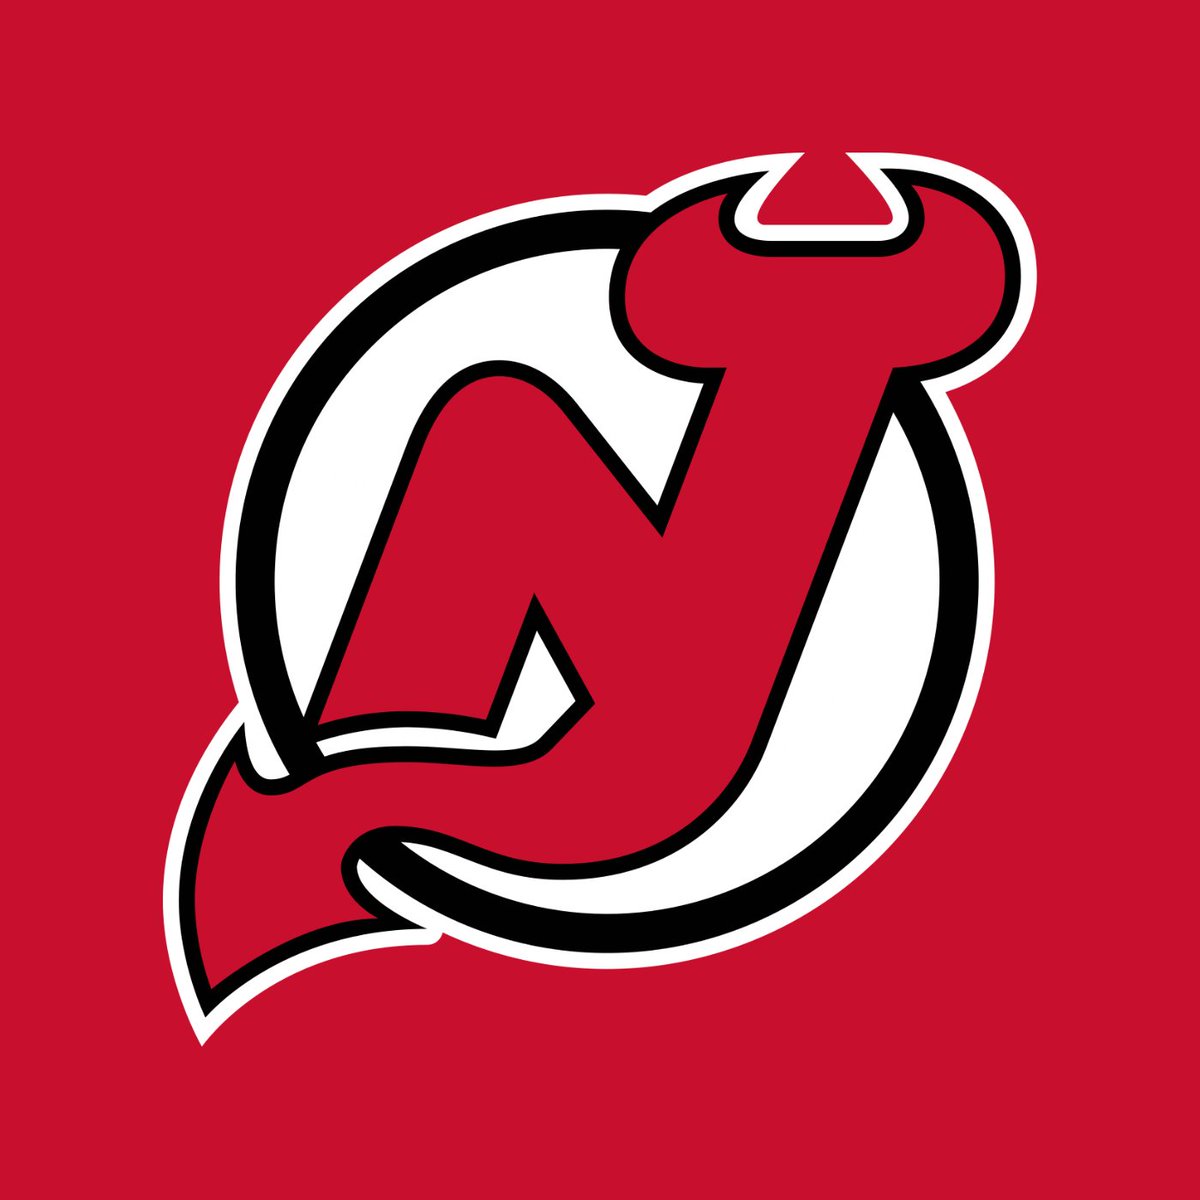 With the 172nd overall selection in the NHL Draft, the New Jersey Devils are proud to select: Gordon Ramsay. https://t.co/RBq0sYcm2b